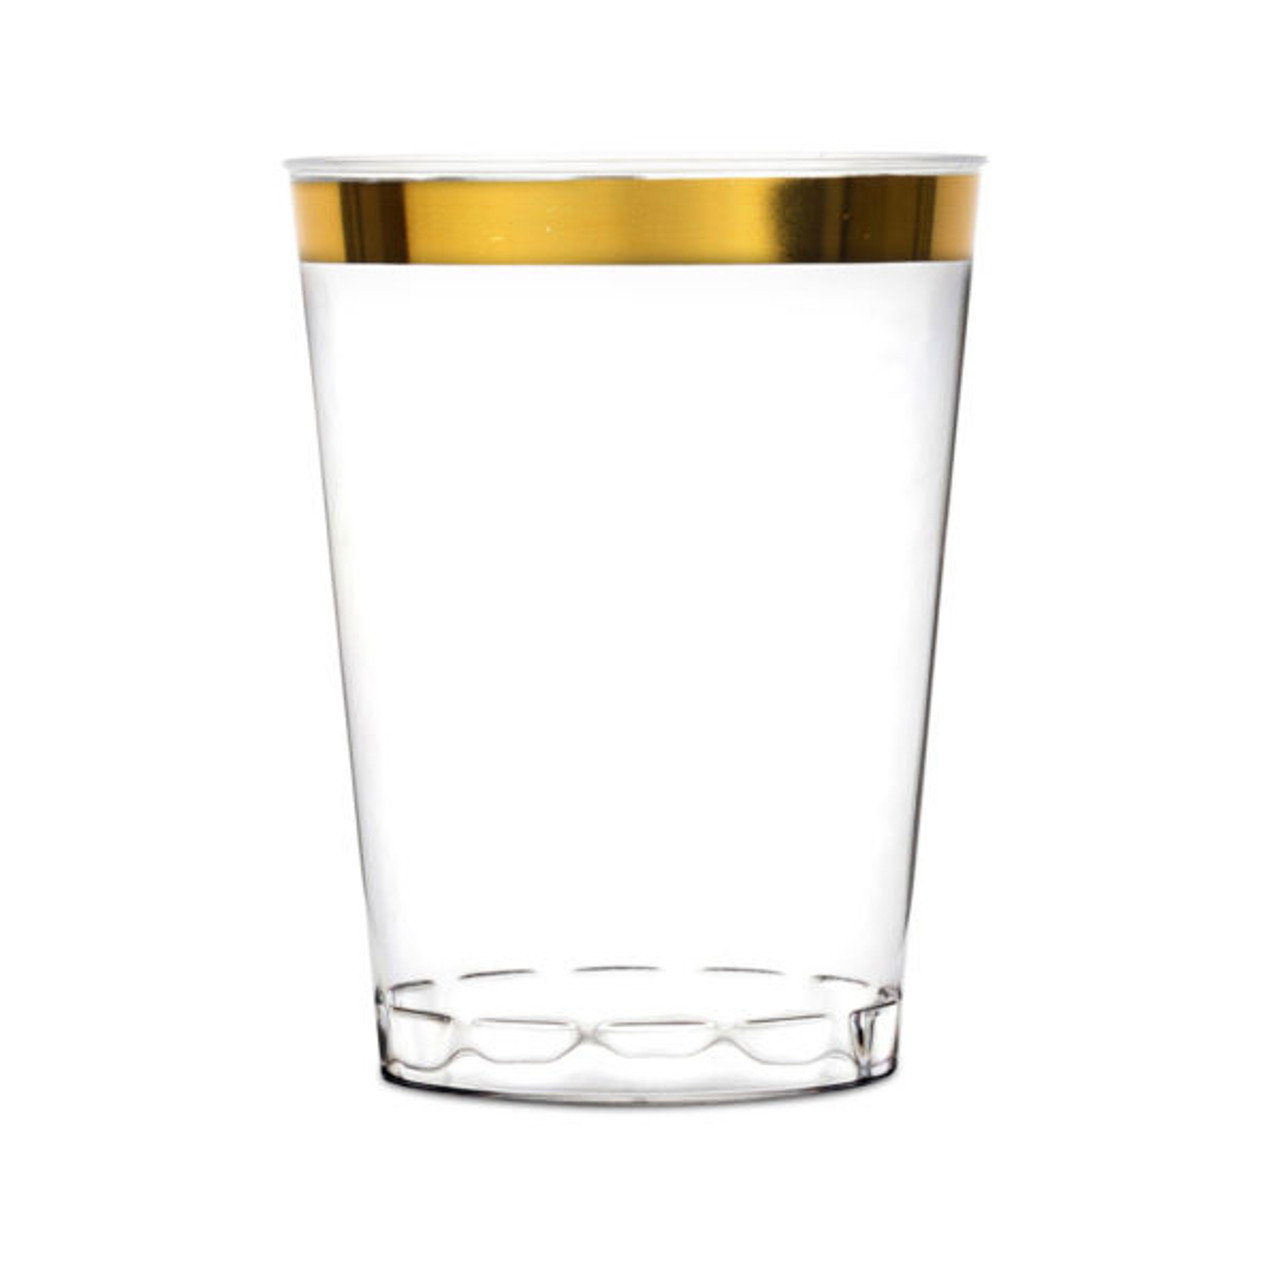 https://cdn11.bigcommerce.com/s-hgqmwywp99/images/stencil/1280x1280/products/48932/43723/10-oz-clear-plastic-cups-old-fashioned-tumblers-gold-rimmed-fancy-disposable-wedding-cups-for-elegant-party-20ct-1__48051.1675880292.jpg?c=1?imbypass=on